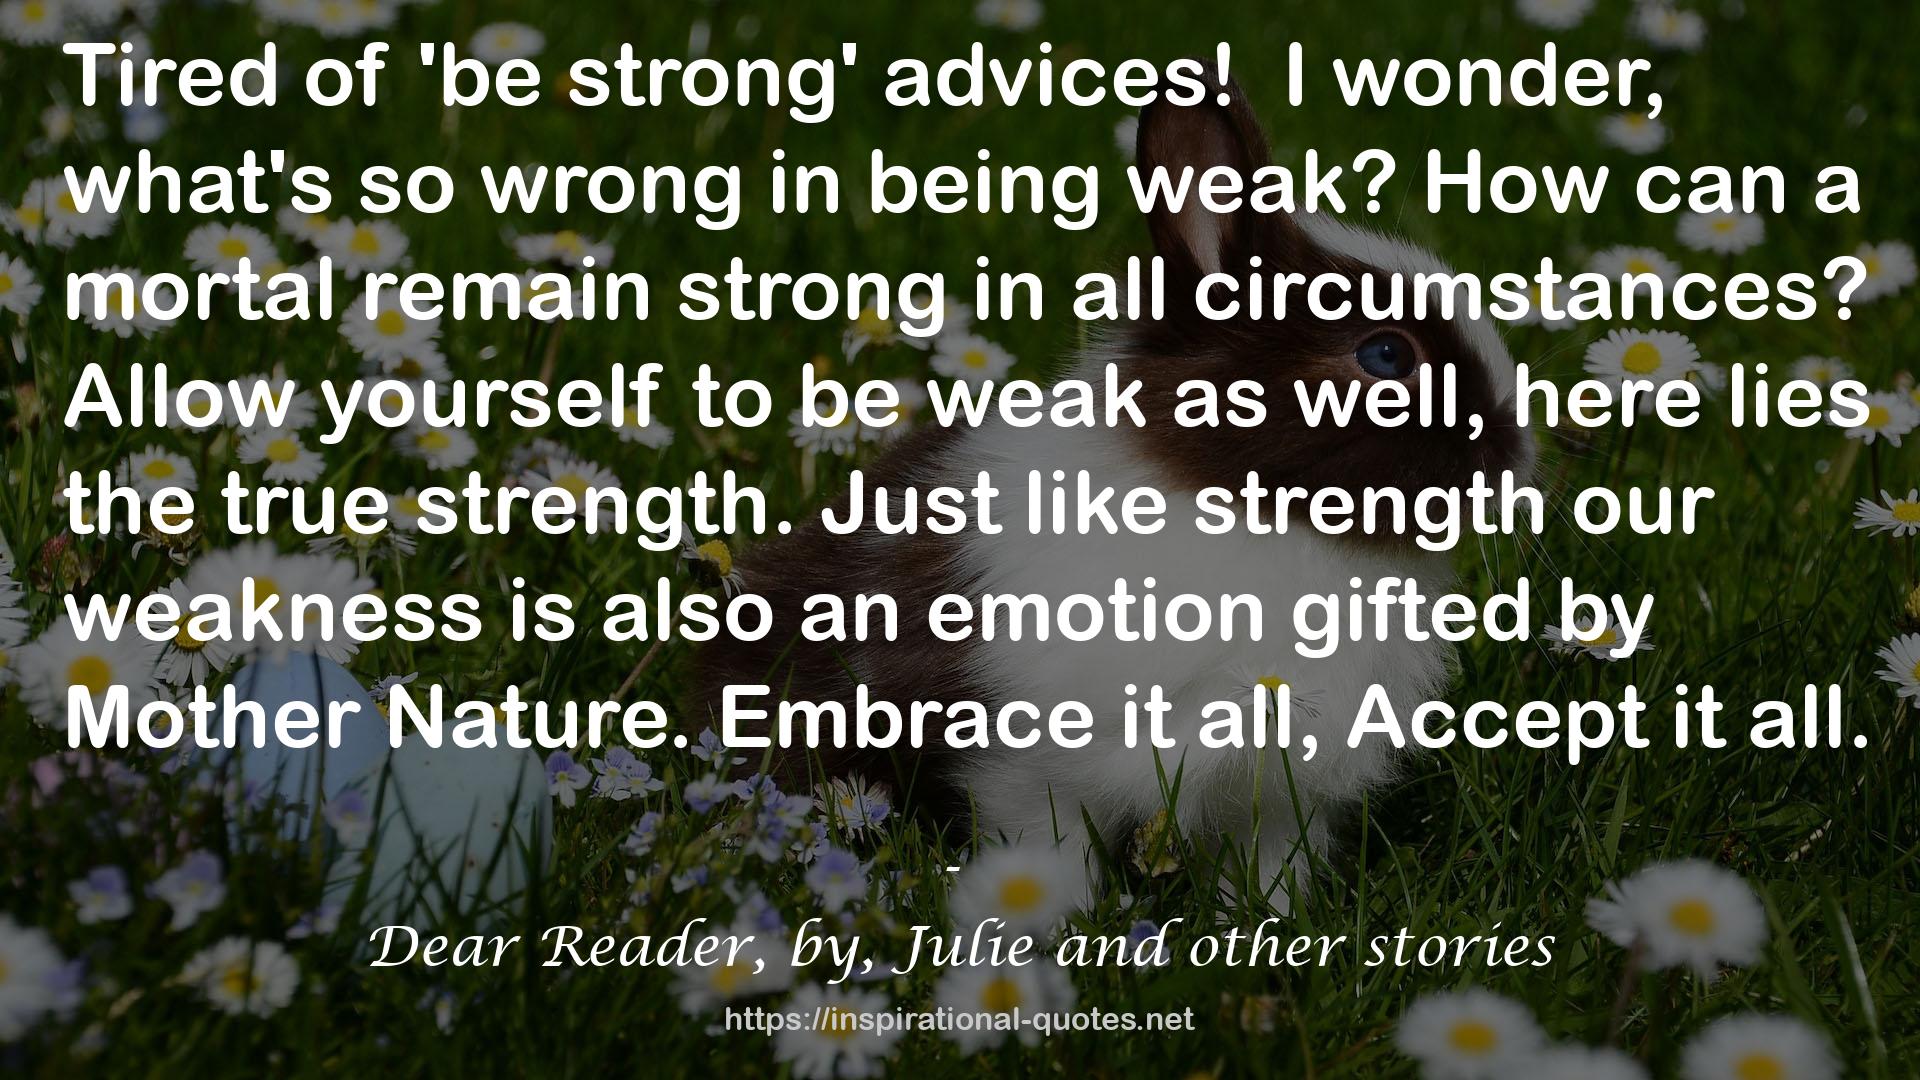 Dear Reader, by, Julie and other stories QUOTES